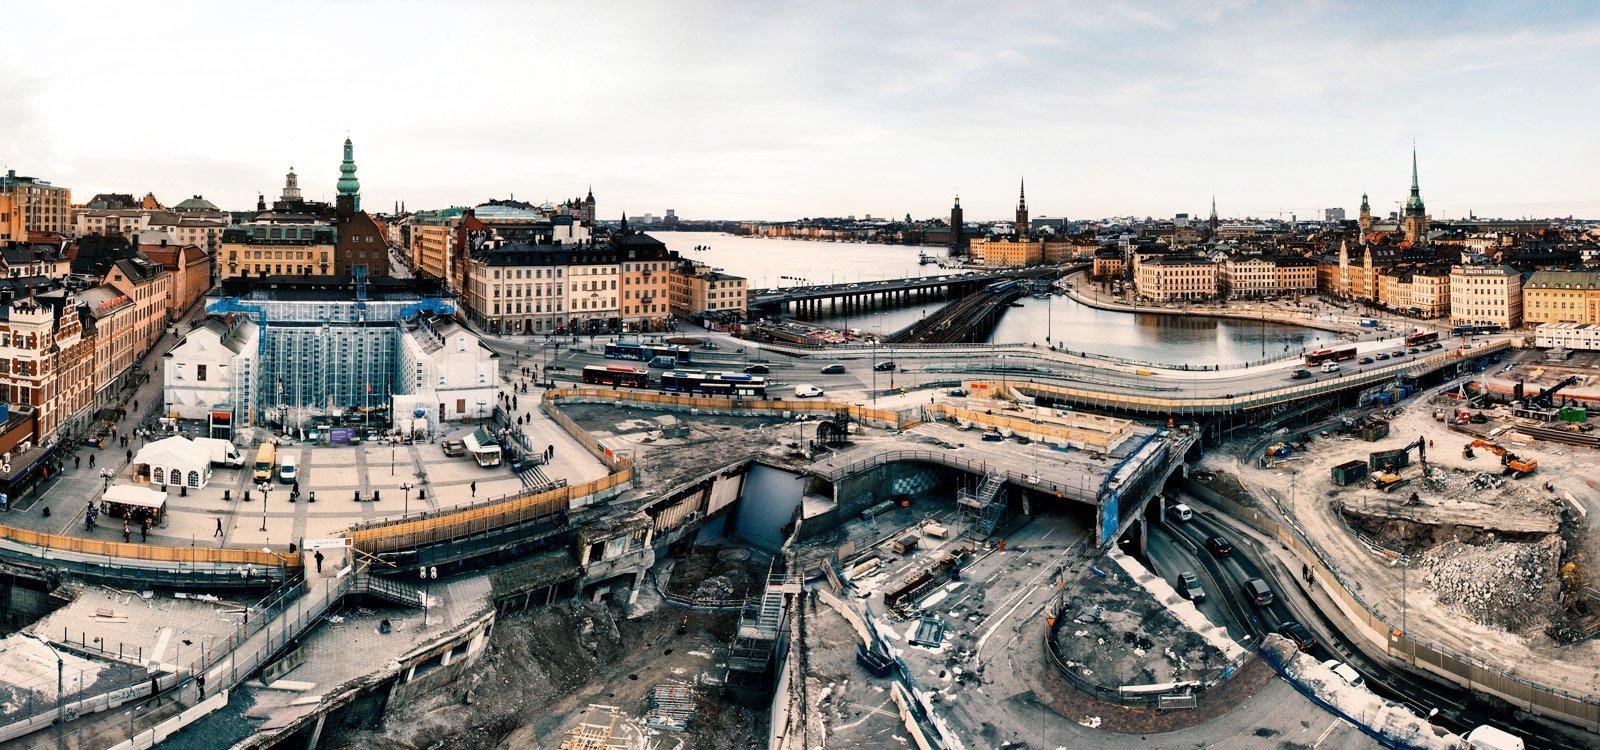 <p>Historic Stockholm is undergoing a major renovation to its old sluice area.</p>
